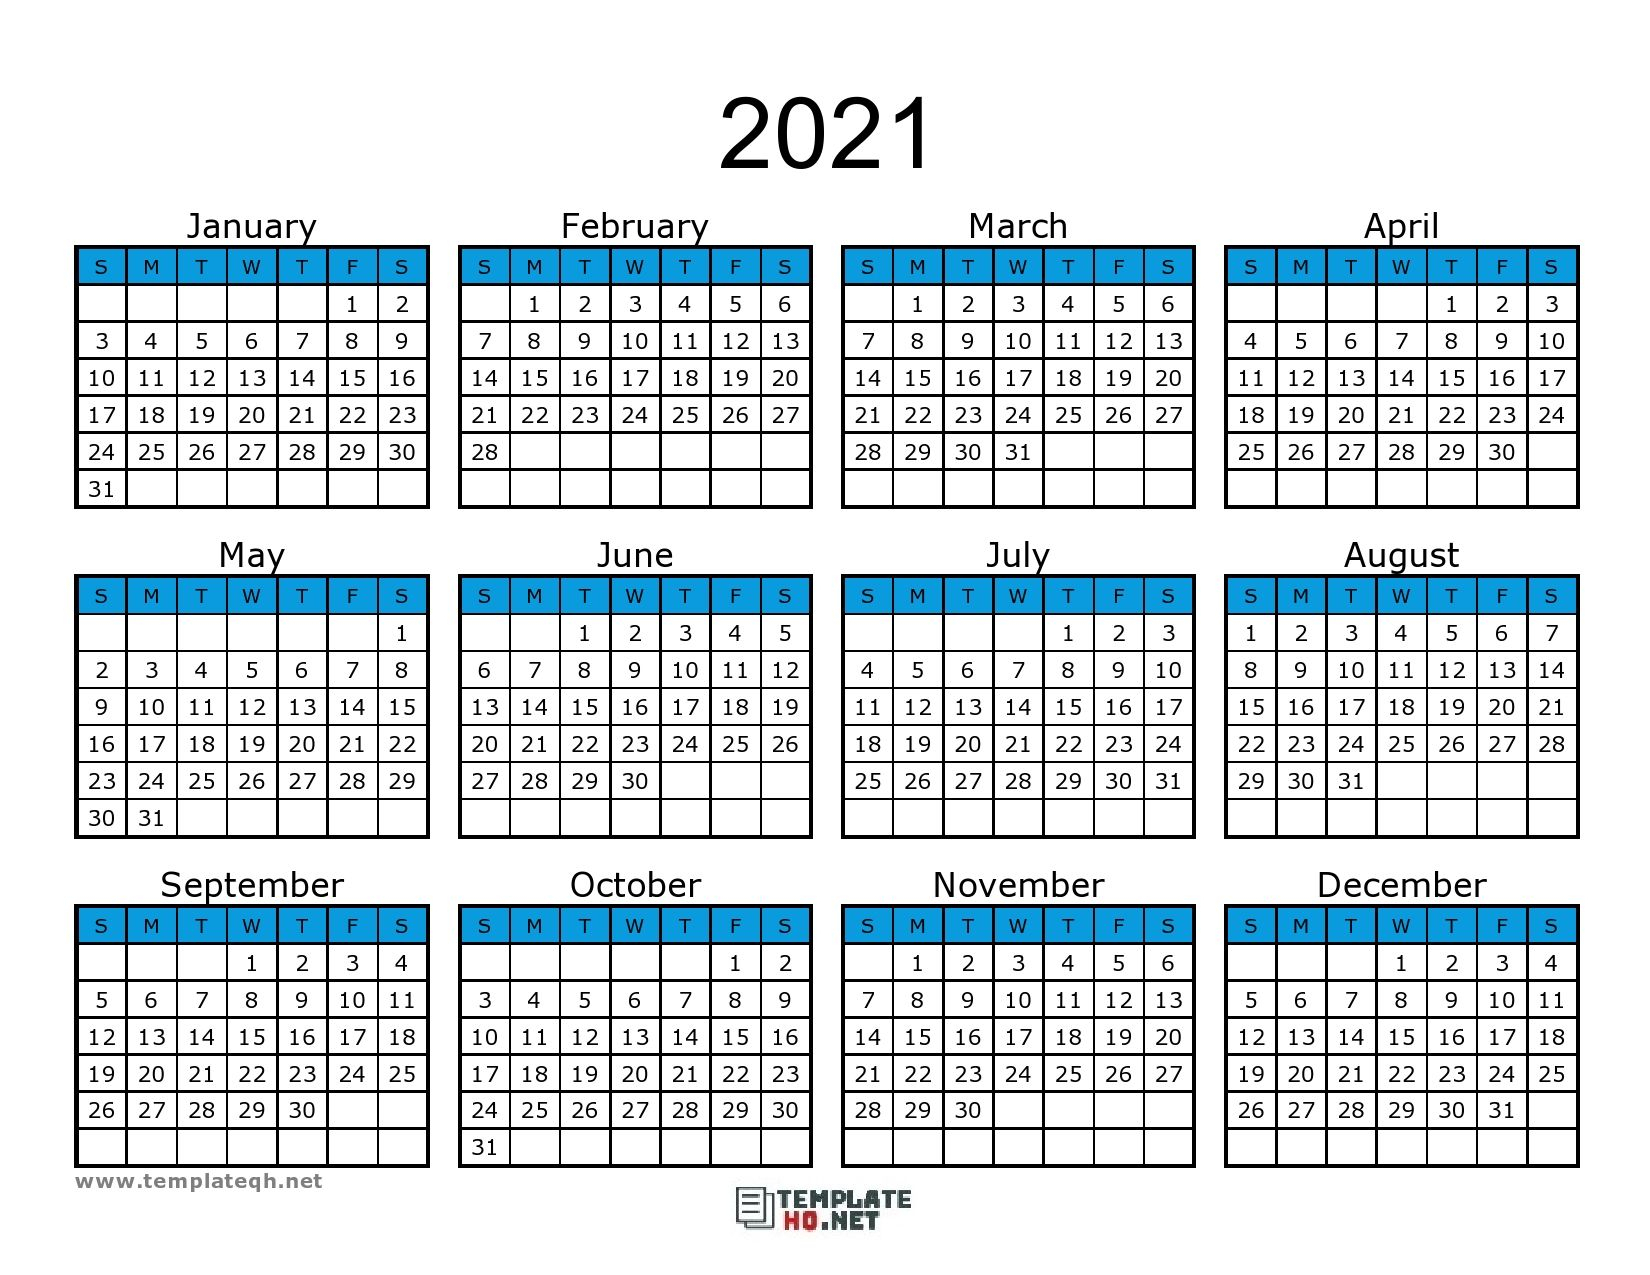 Free 2021 Calendar Printable Di 2020 for Calendars Printable 2021 Free With Grid Lines